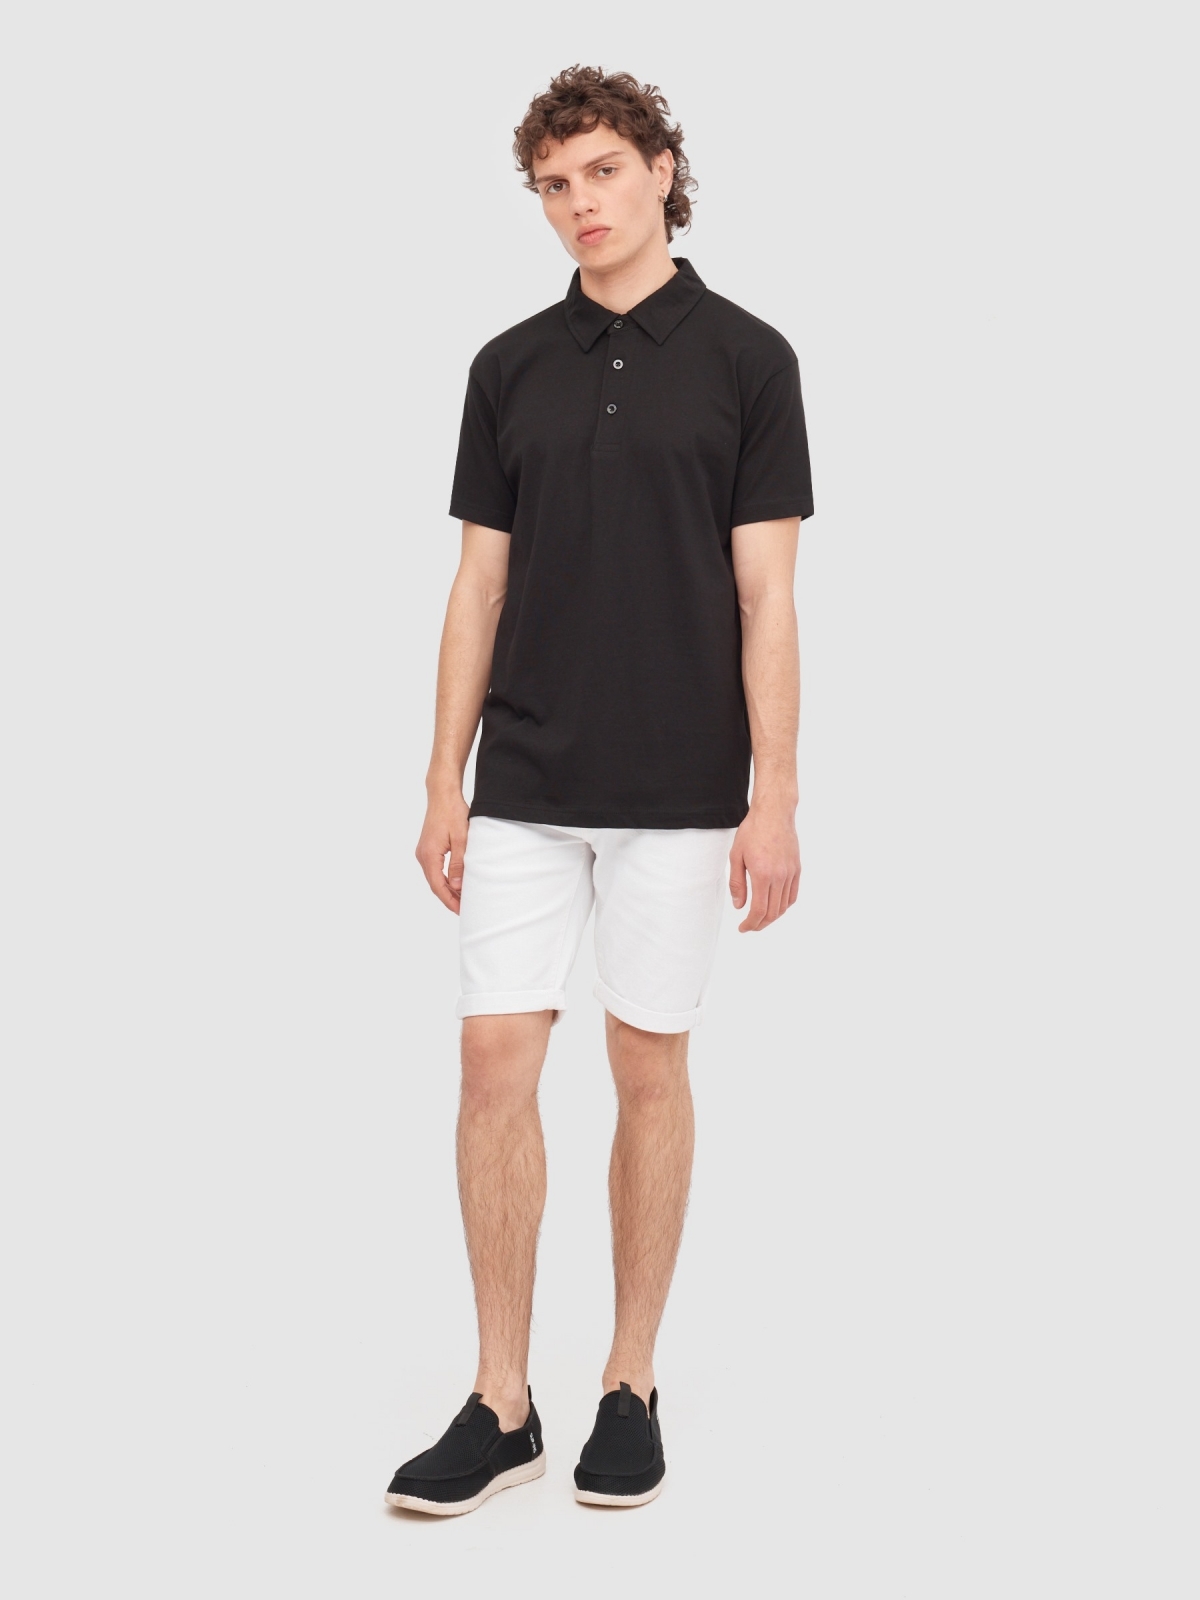 Basic short-sleeved polo shirt black front view